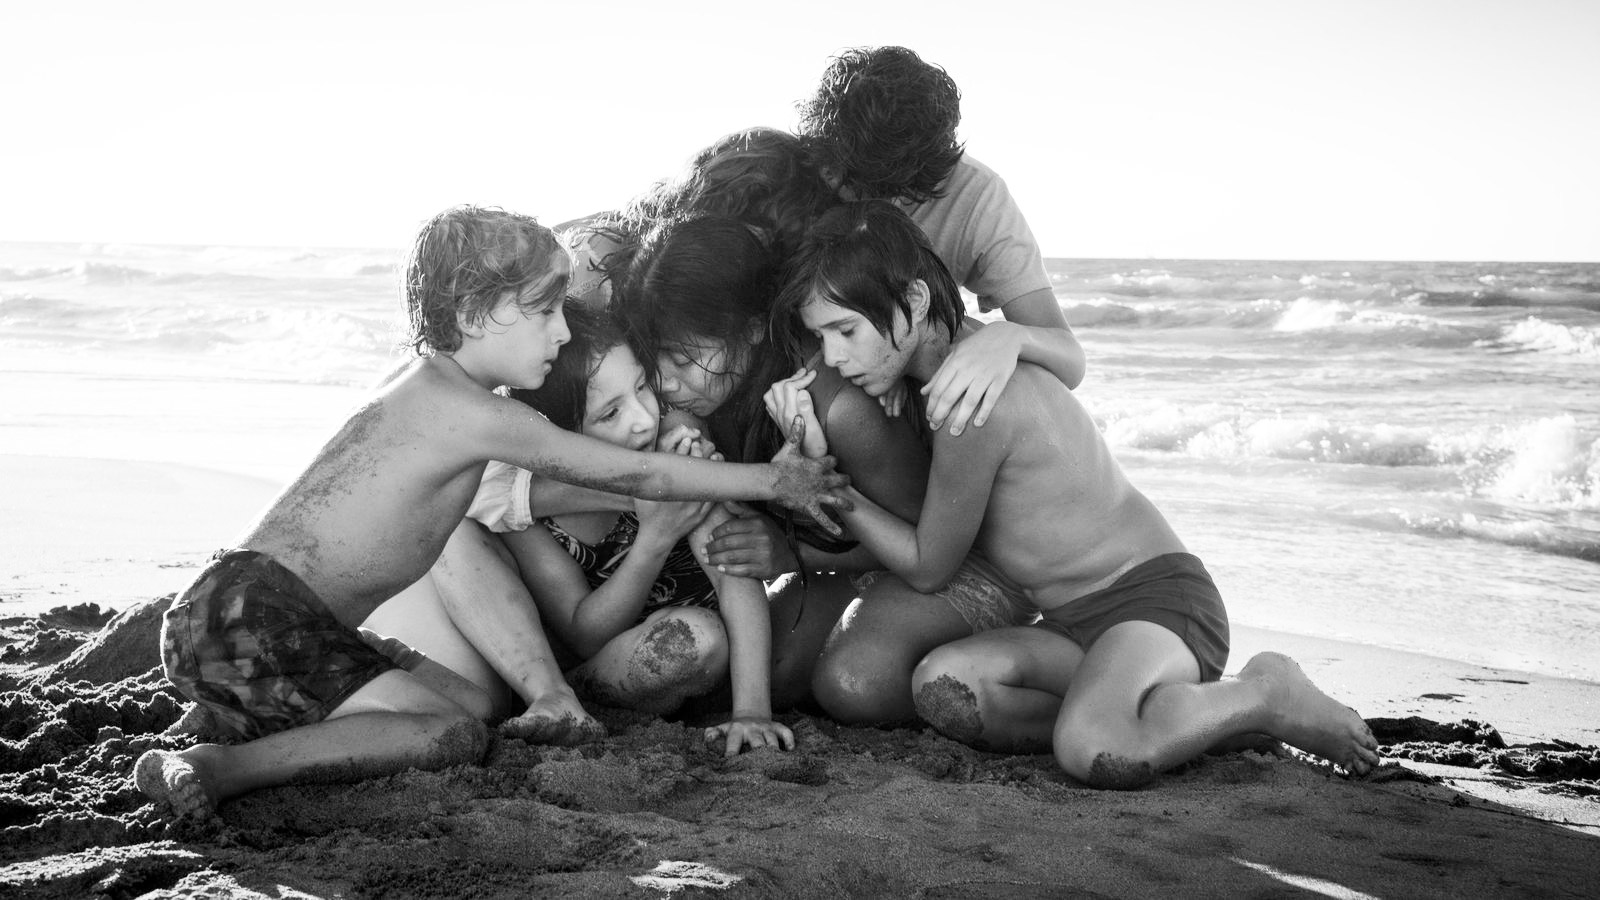 Embracing Complexity: A Review of Alfonso Cuaron’s ‘Roma’ (2018)